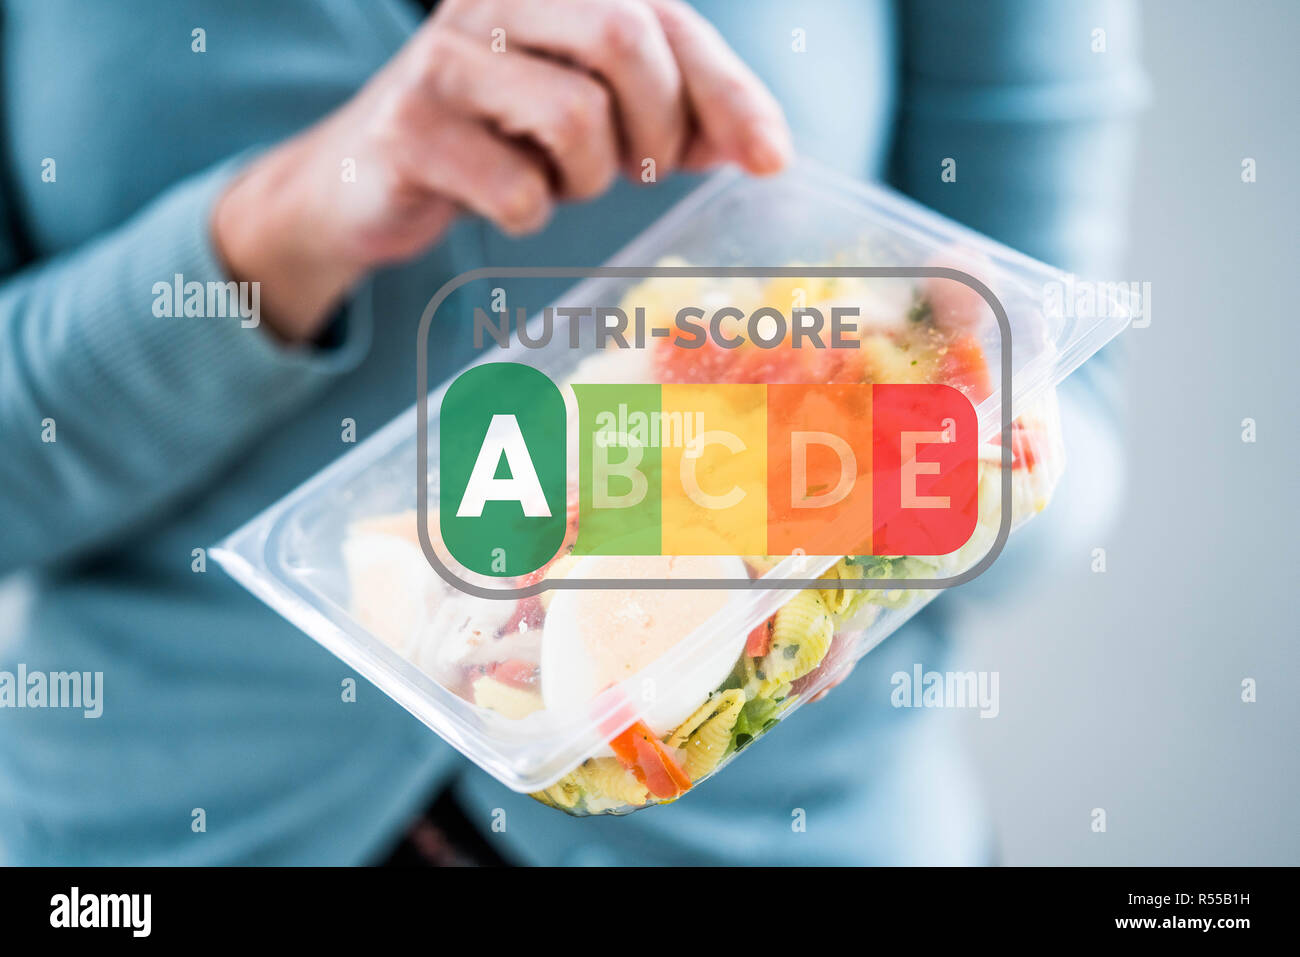 Concept on the nutrition information system in 5 colors NUTRI-SCORE, France. Stock Photo